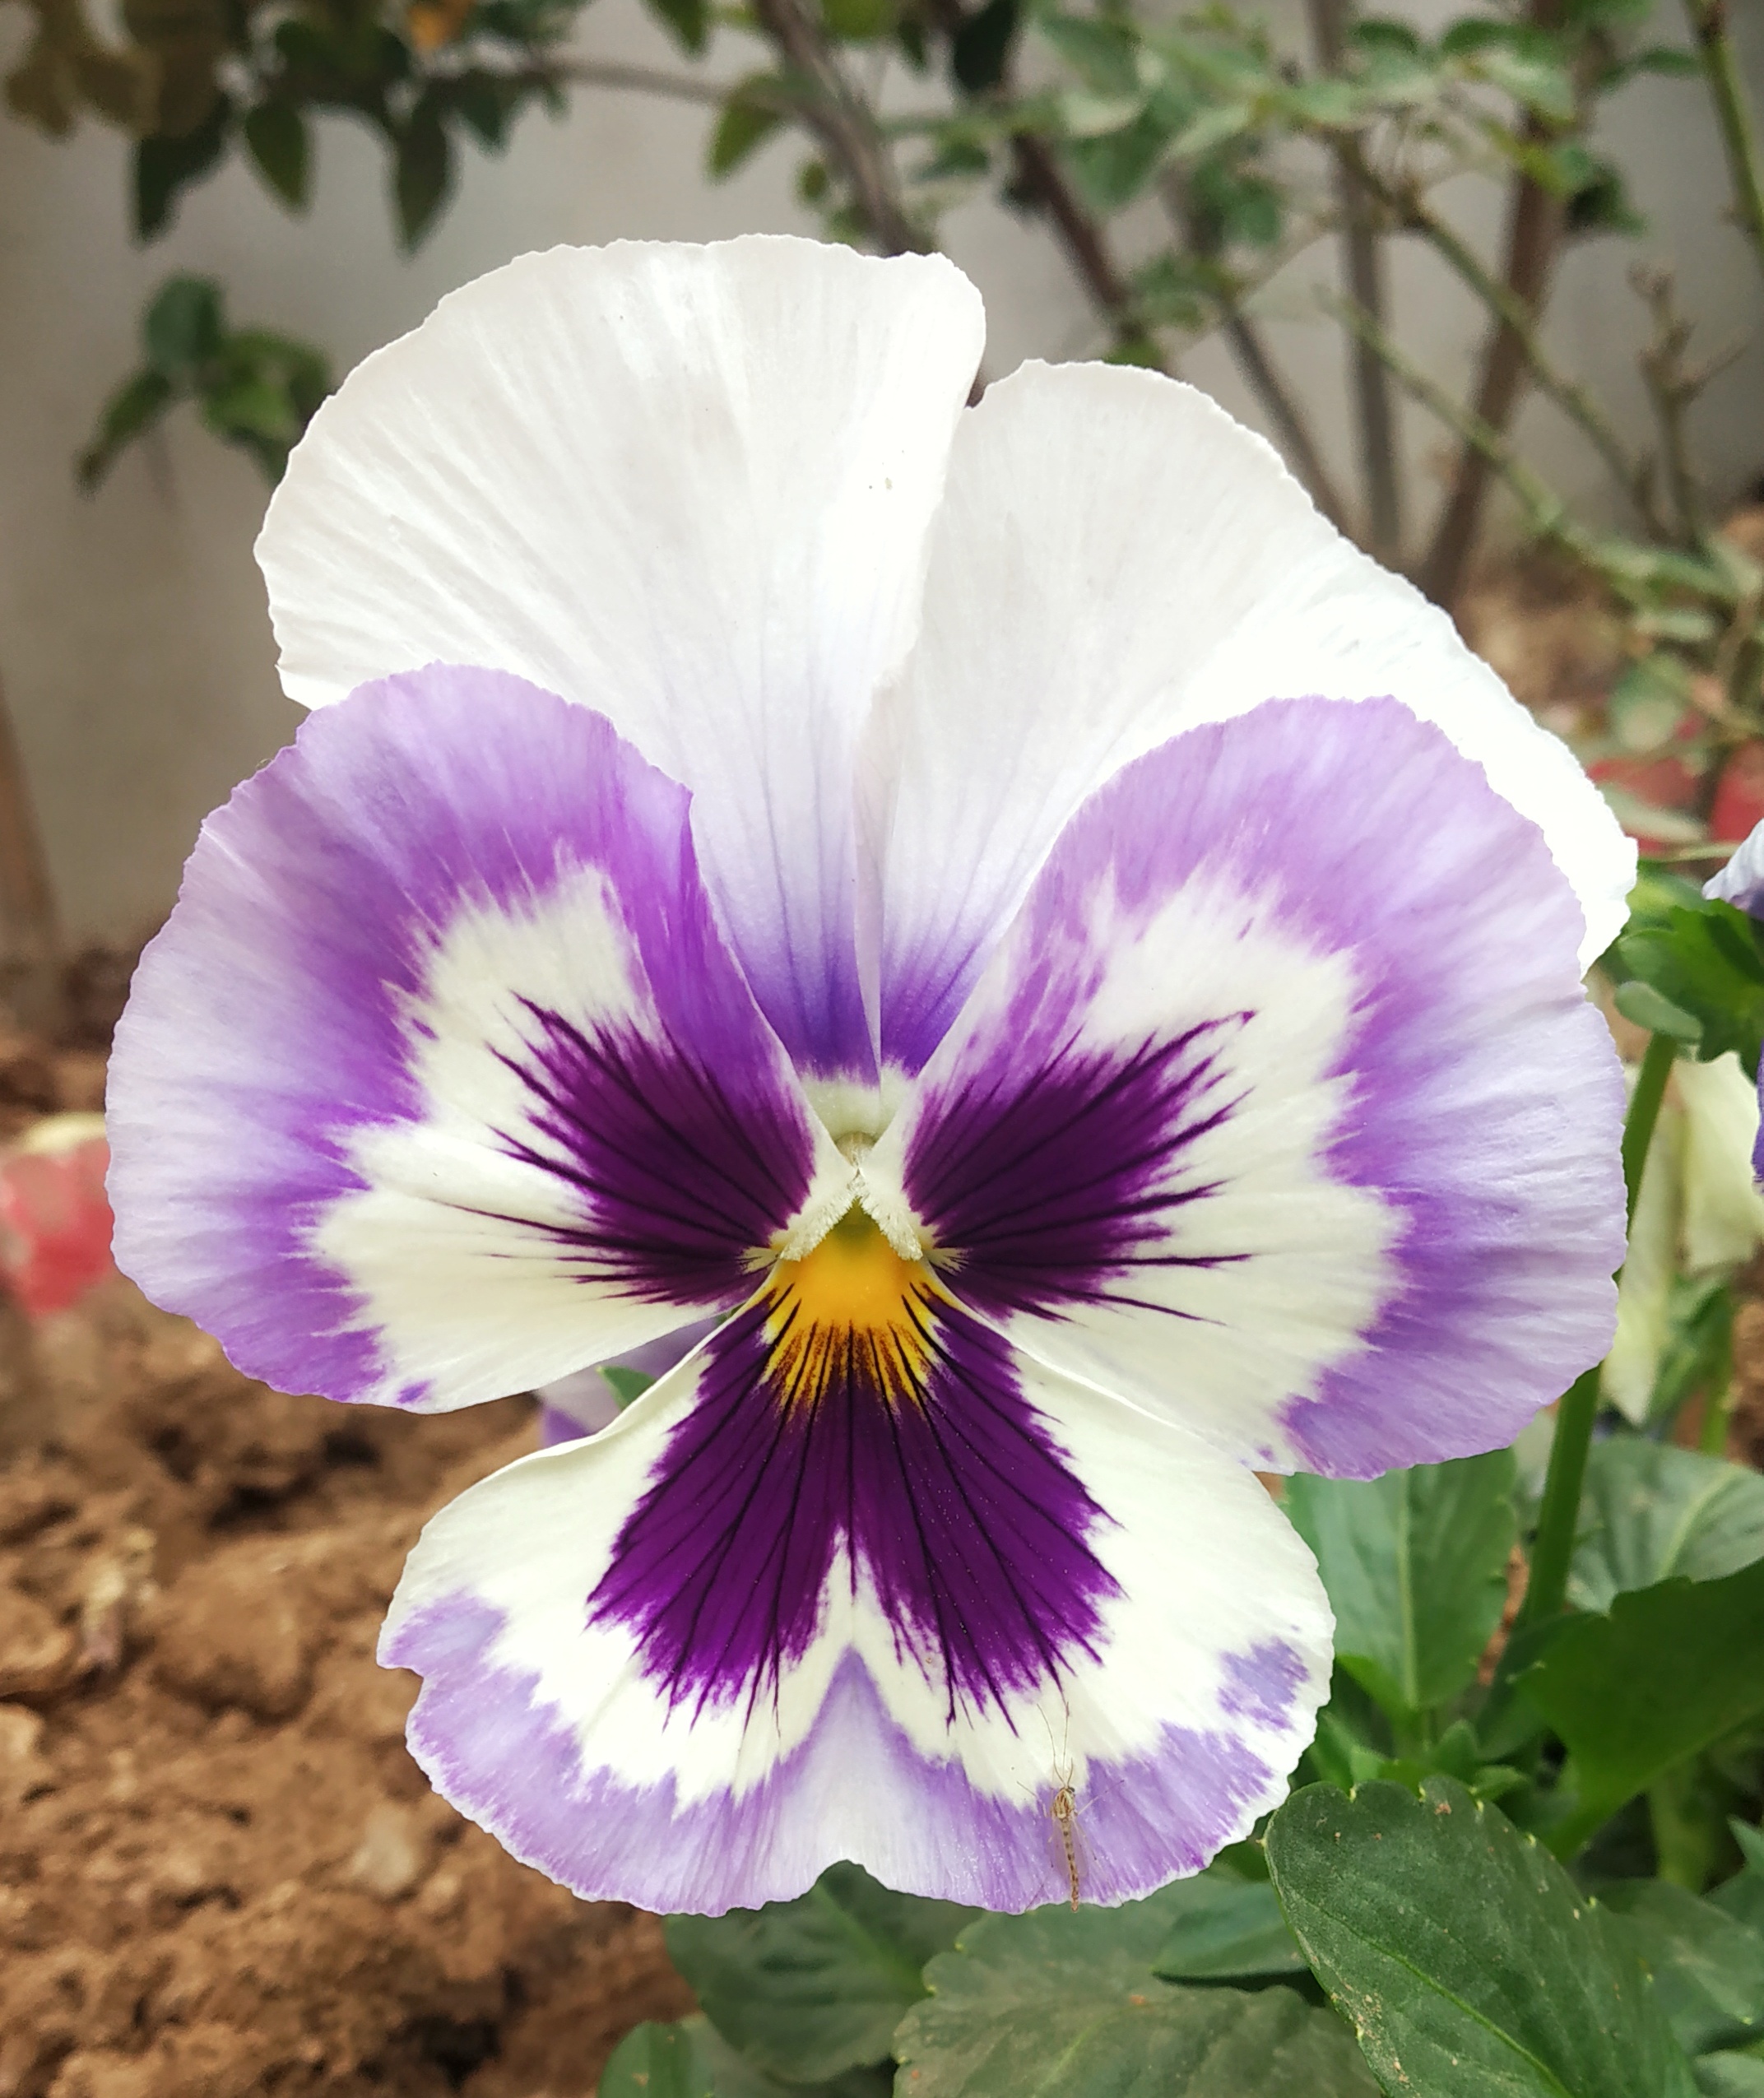 Pansy blooming flower